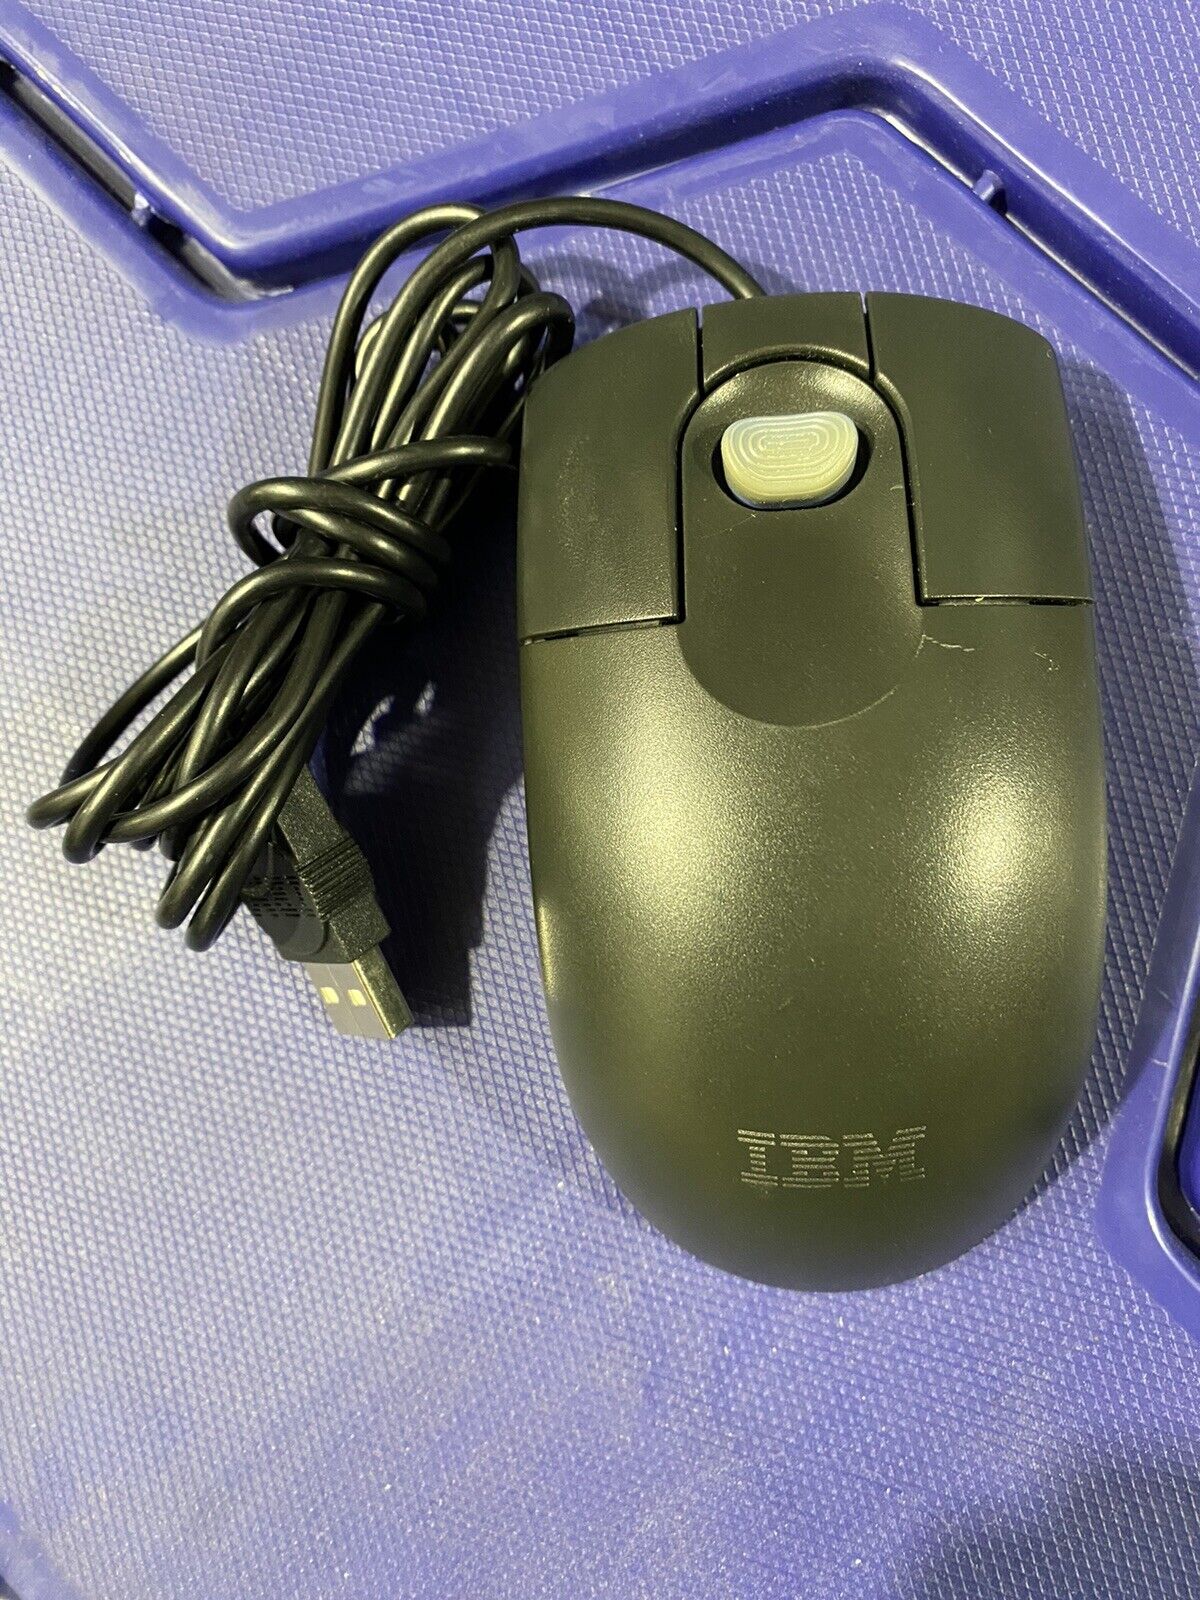 IBM MO09KZ Mouse USB ScrollPoint WIRED Corded VINTAGE